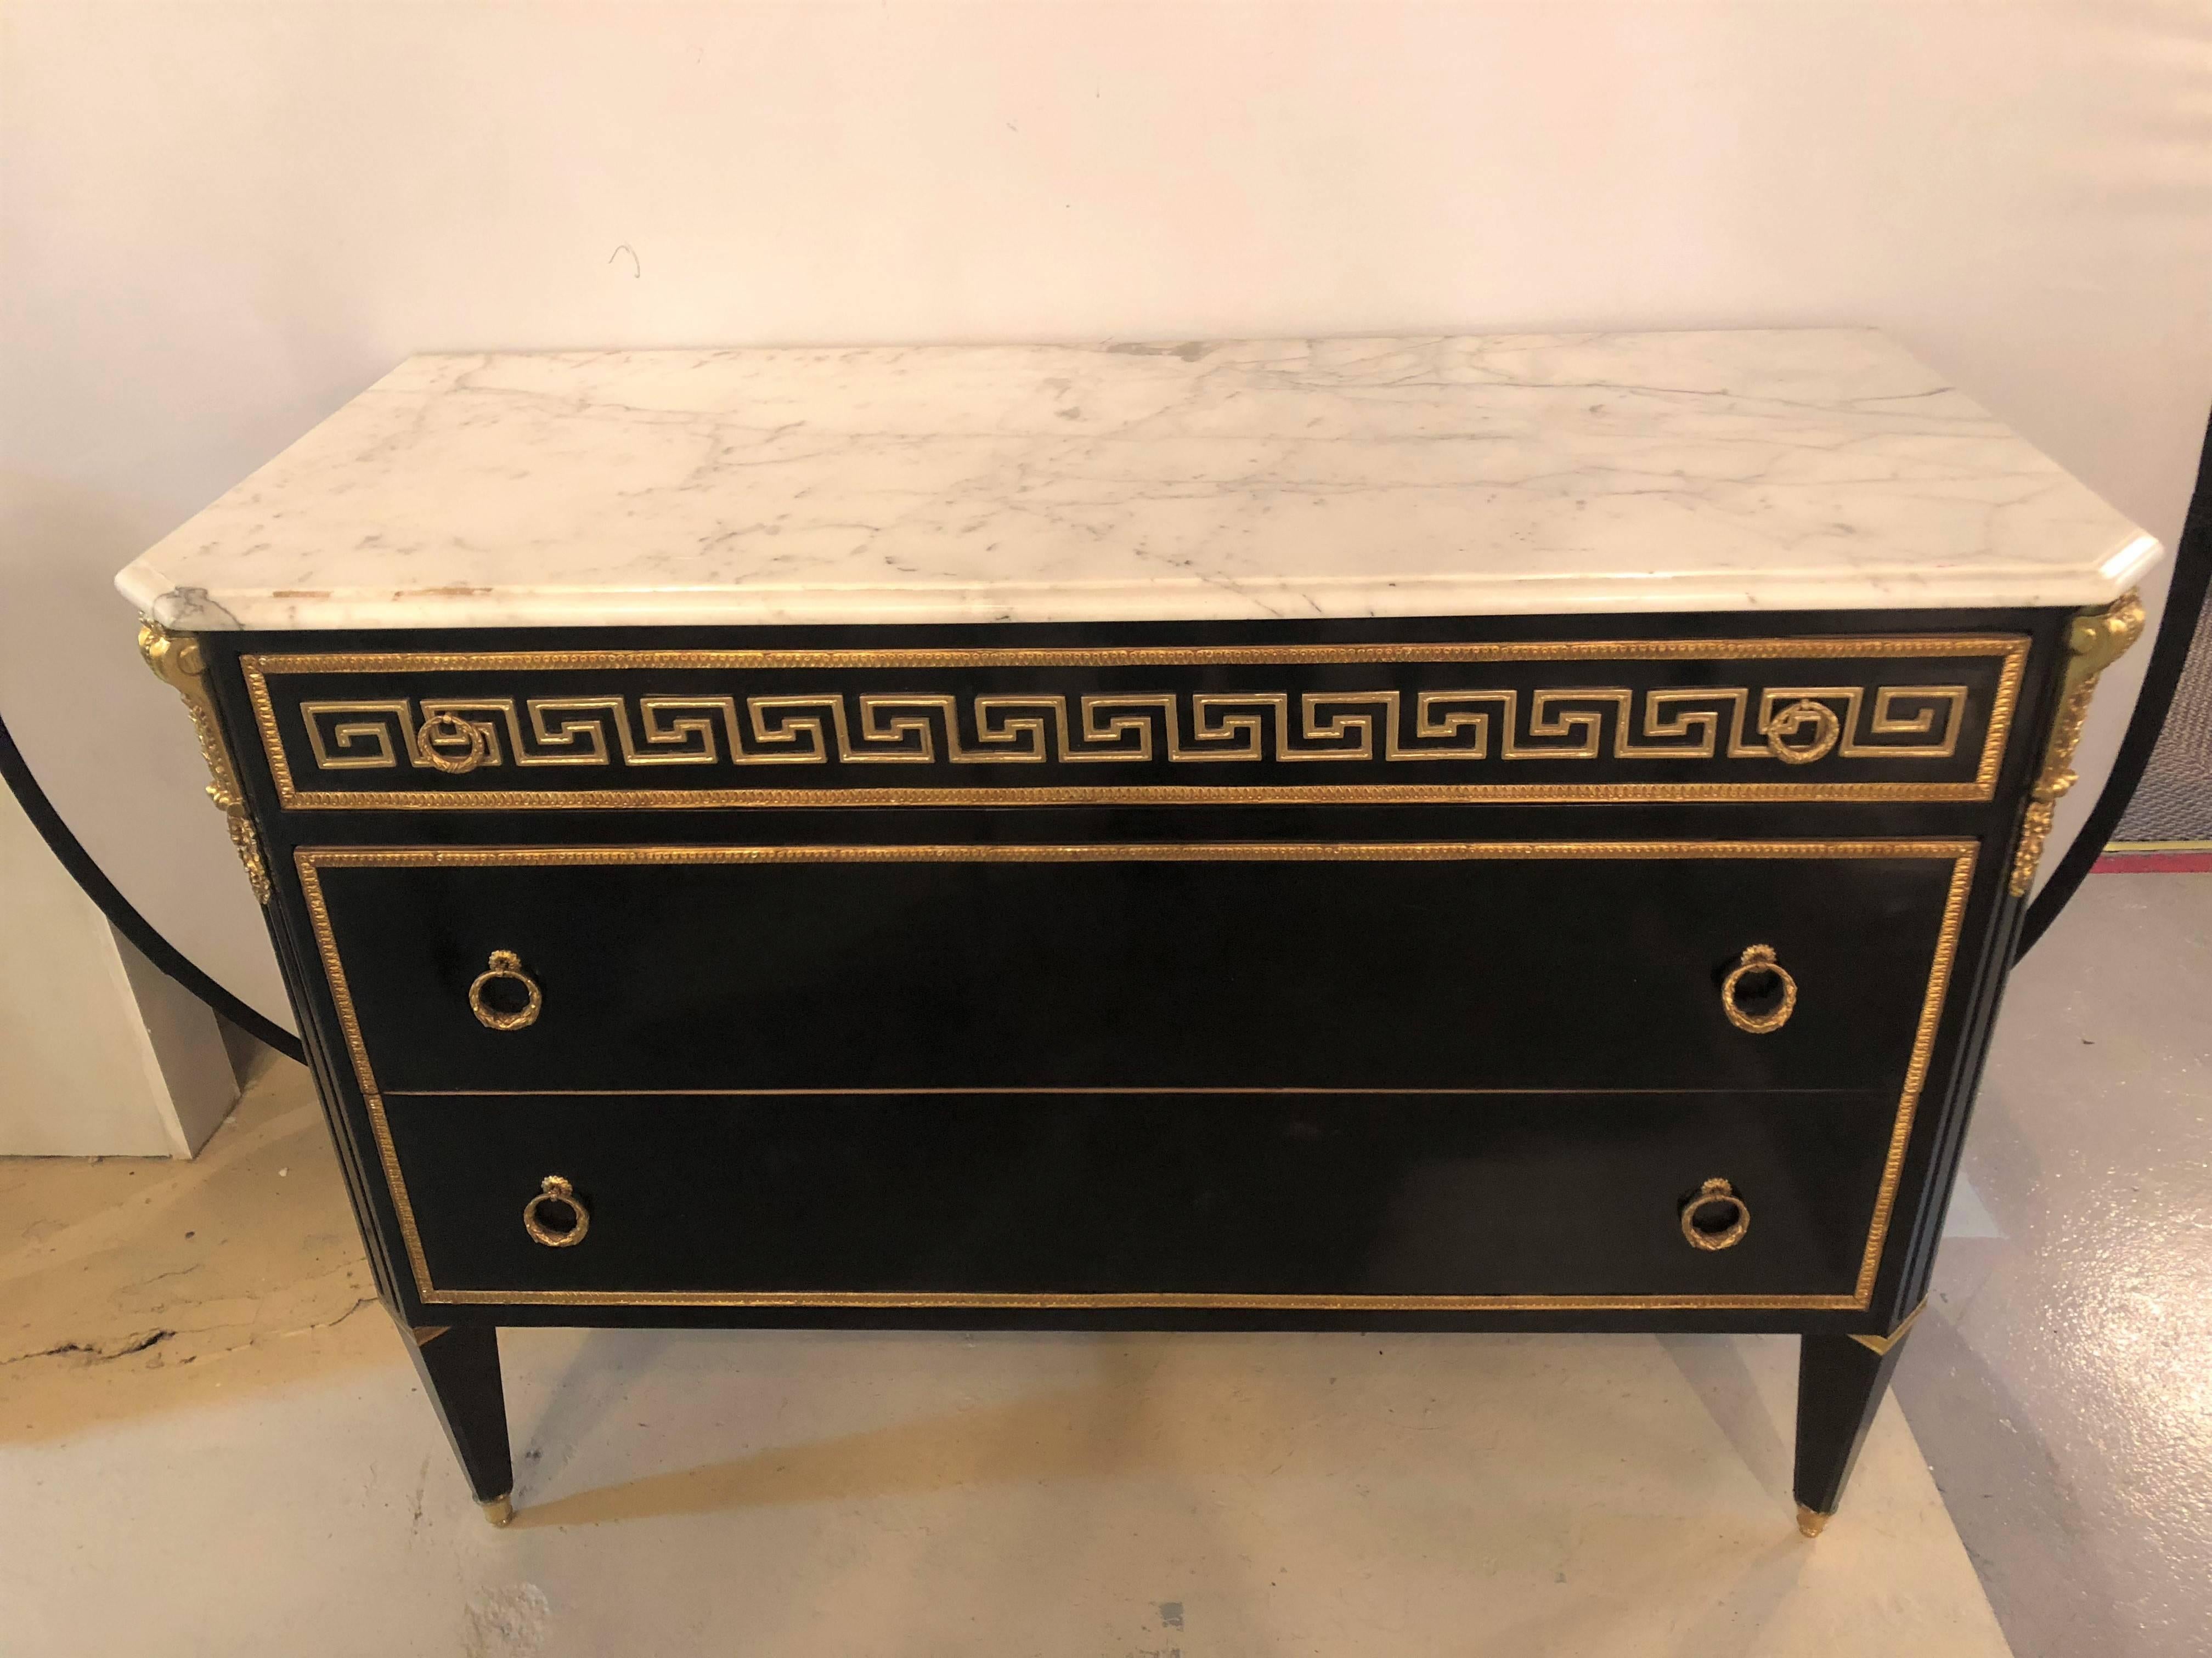 Simply the finest in quality and style come this pair of Hollywood Regency style ebony bronze Greek key design commodes or nightstands in the manner Maison Jansen. 